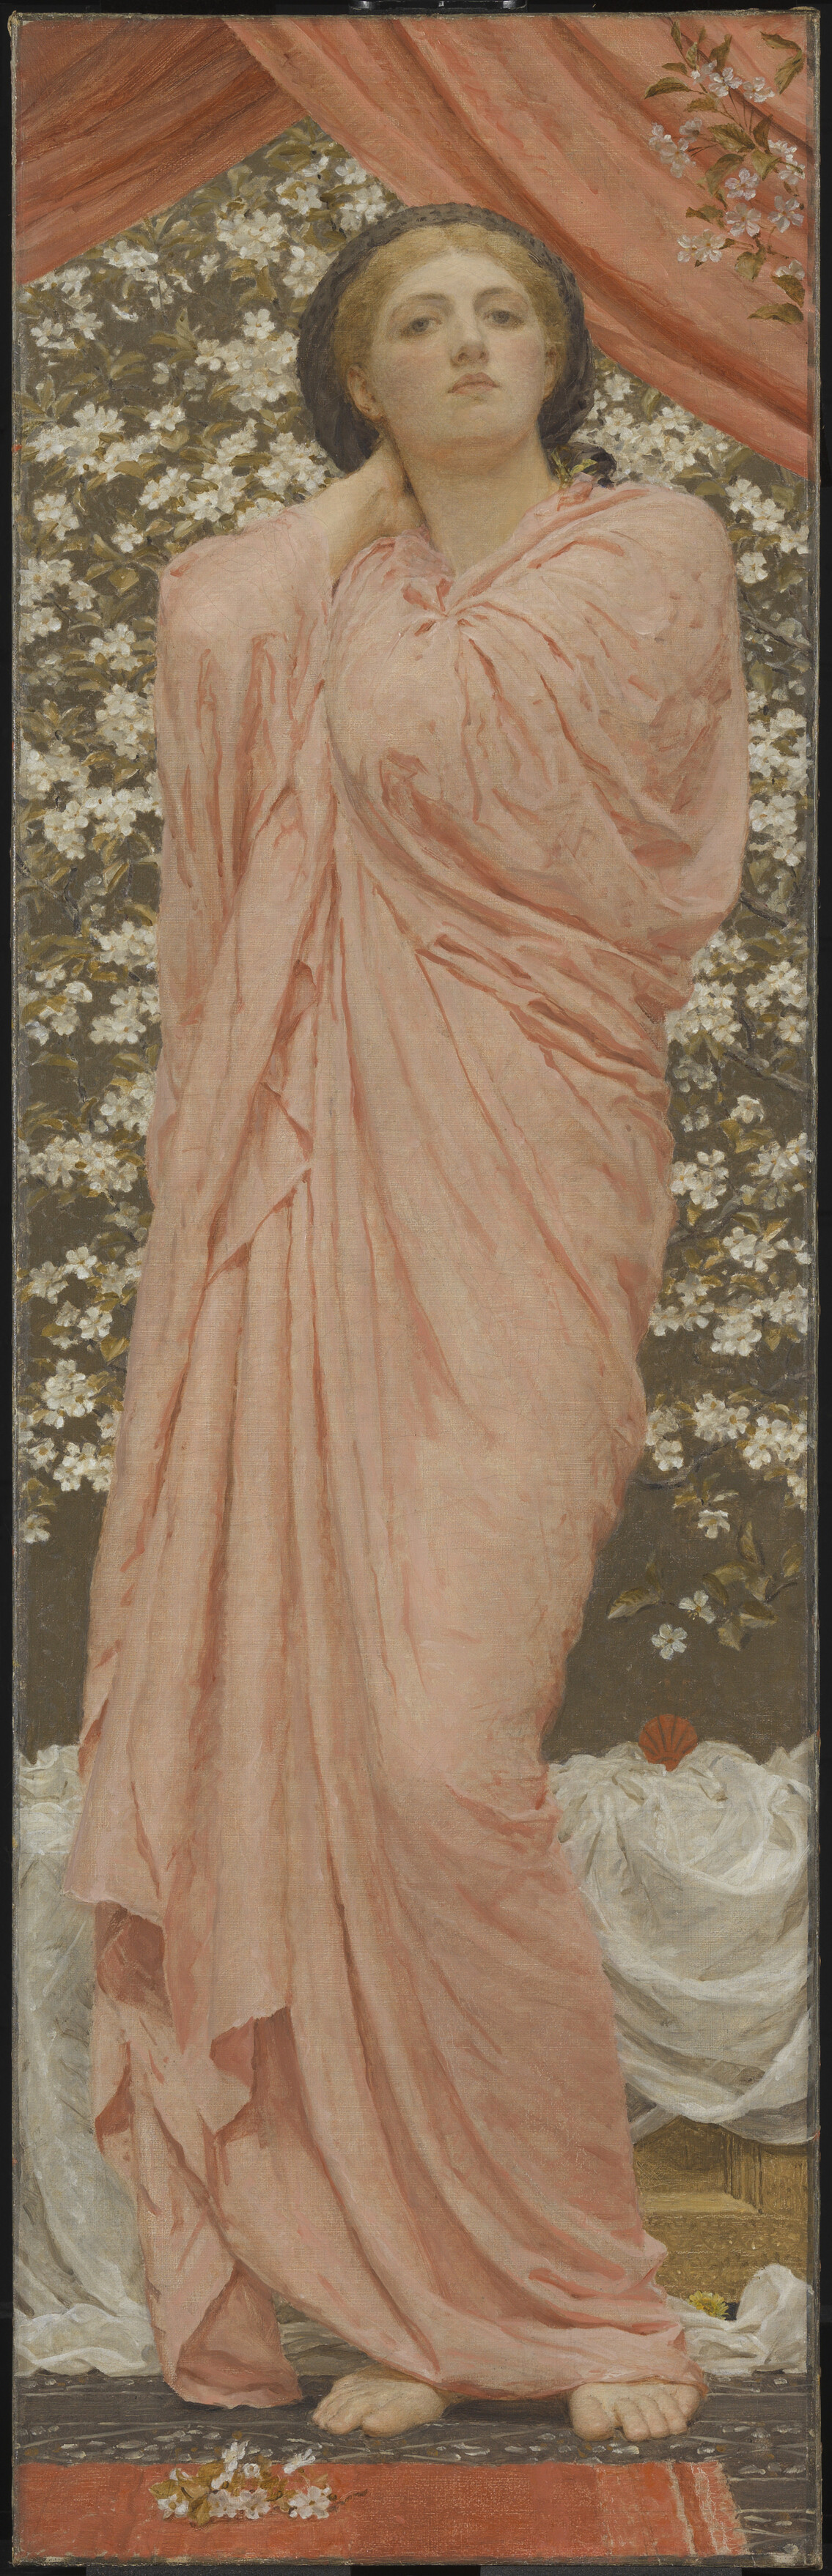 A full-length oil-paint portrait of a standing female figure draped in a robe, which covers her from neck to ankle.